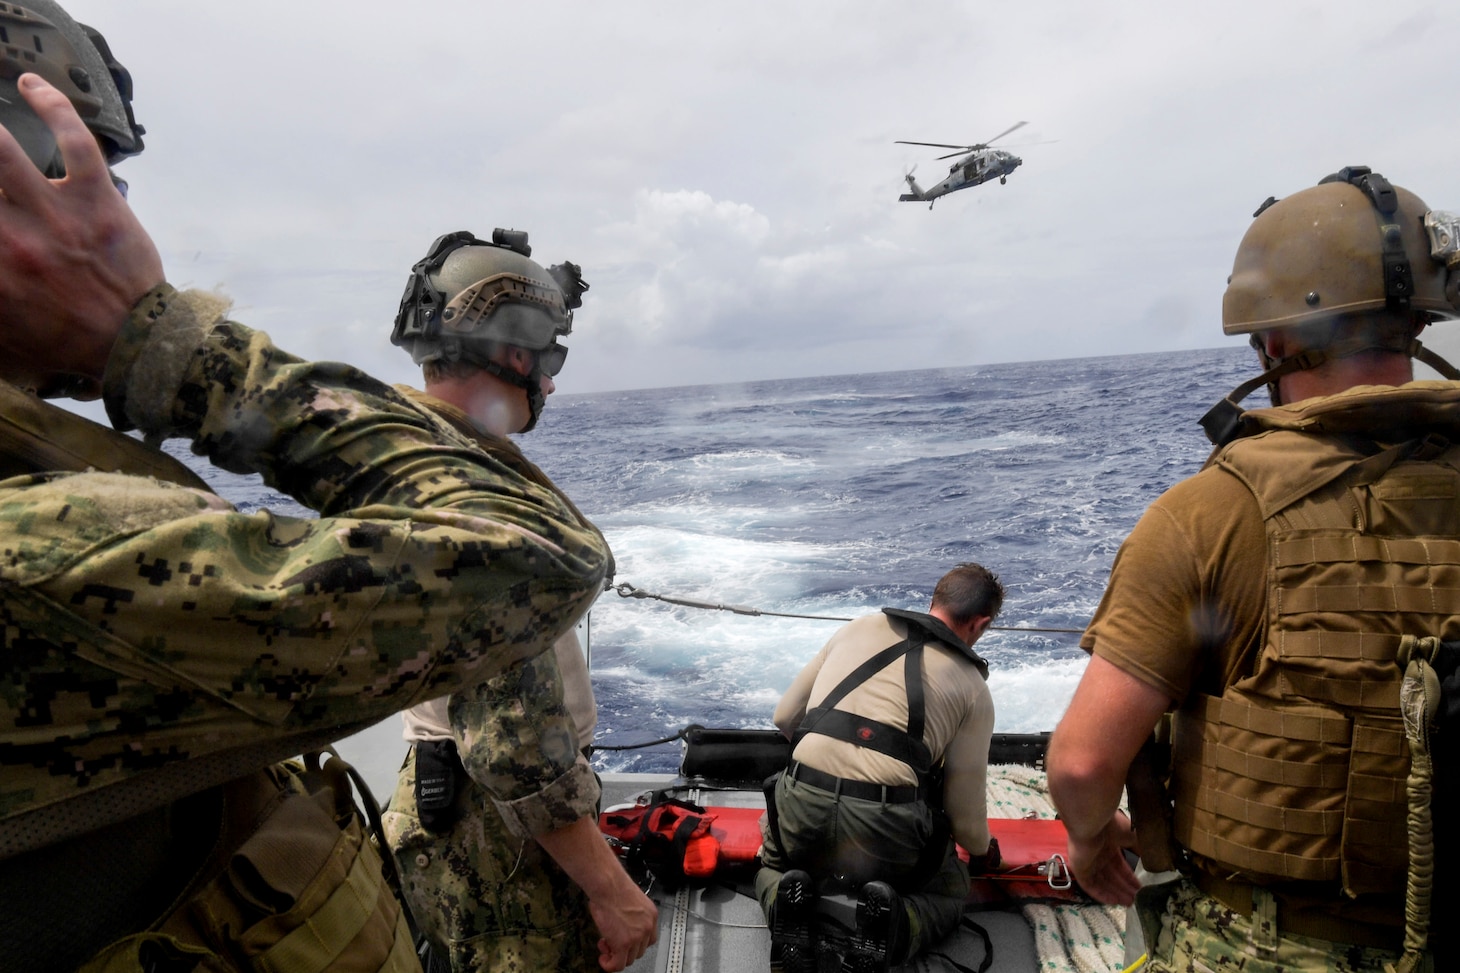 Sailors on Guam Hold Joint Search and Rescue Exercise with U.S. 